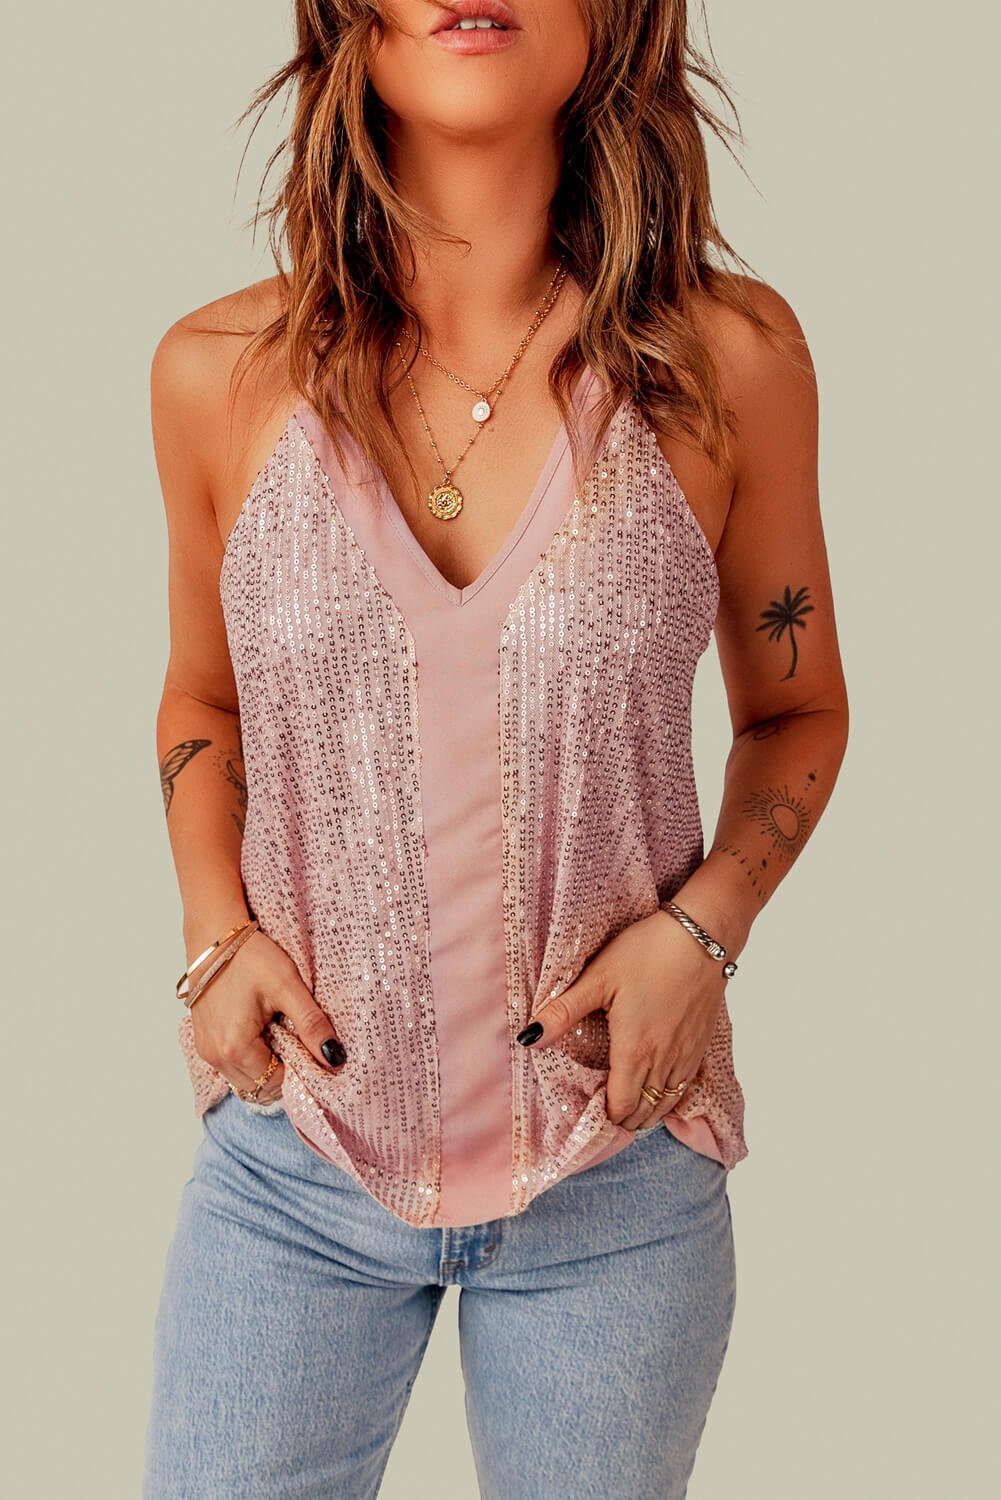 Women’s Sequin Tank Tops - pink sequin tank top with a racerback #Firefly Lane Boutique1